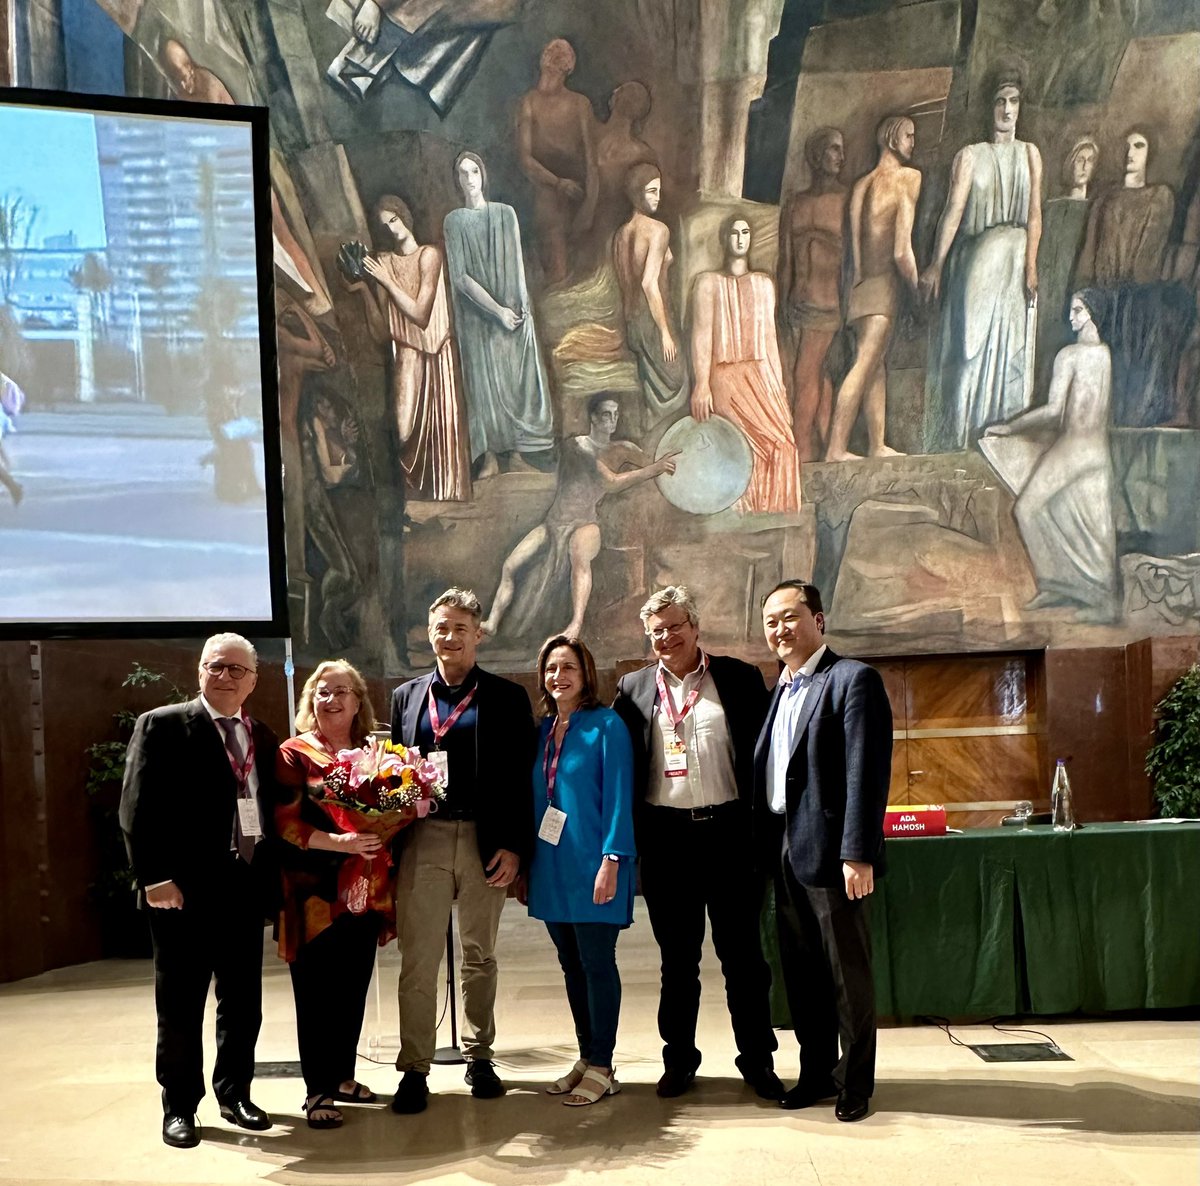 Wrapping up the Human Genome meeting in Rome! @humangenomeorg Ada Hamosh @JohnsHopkins did a brilliant job as President. Proud to be on the international scientific committee!